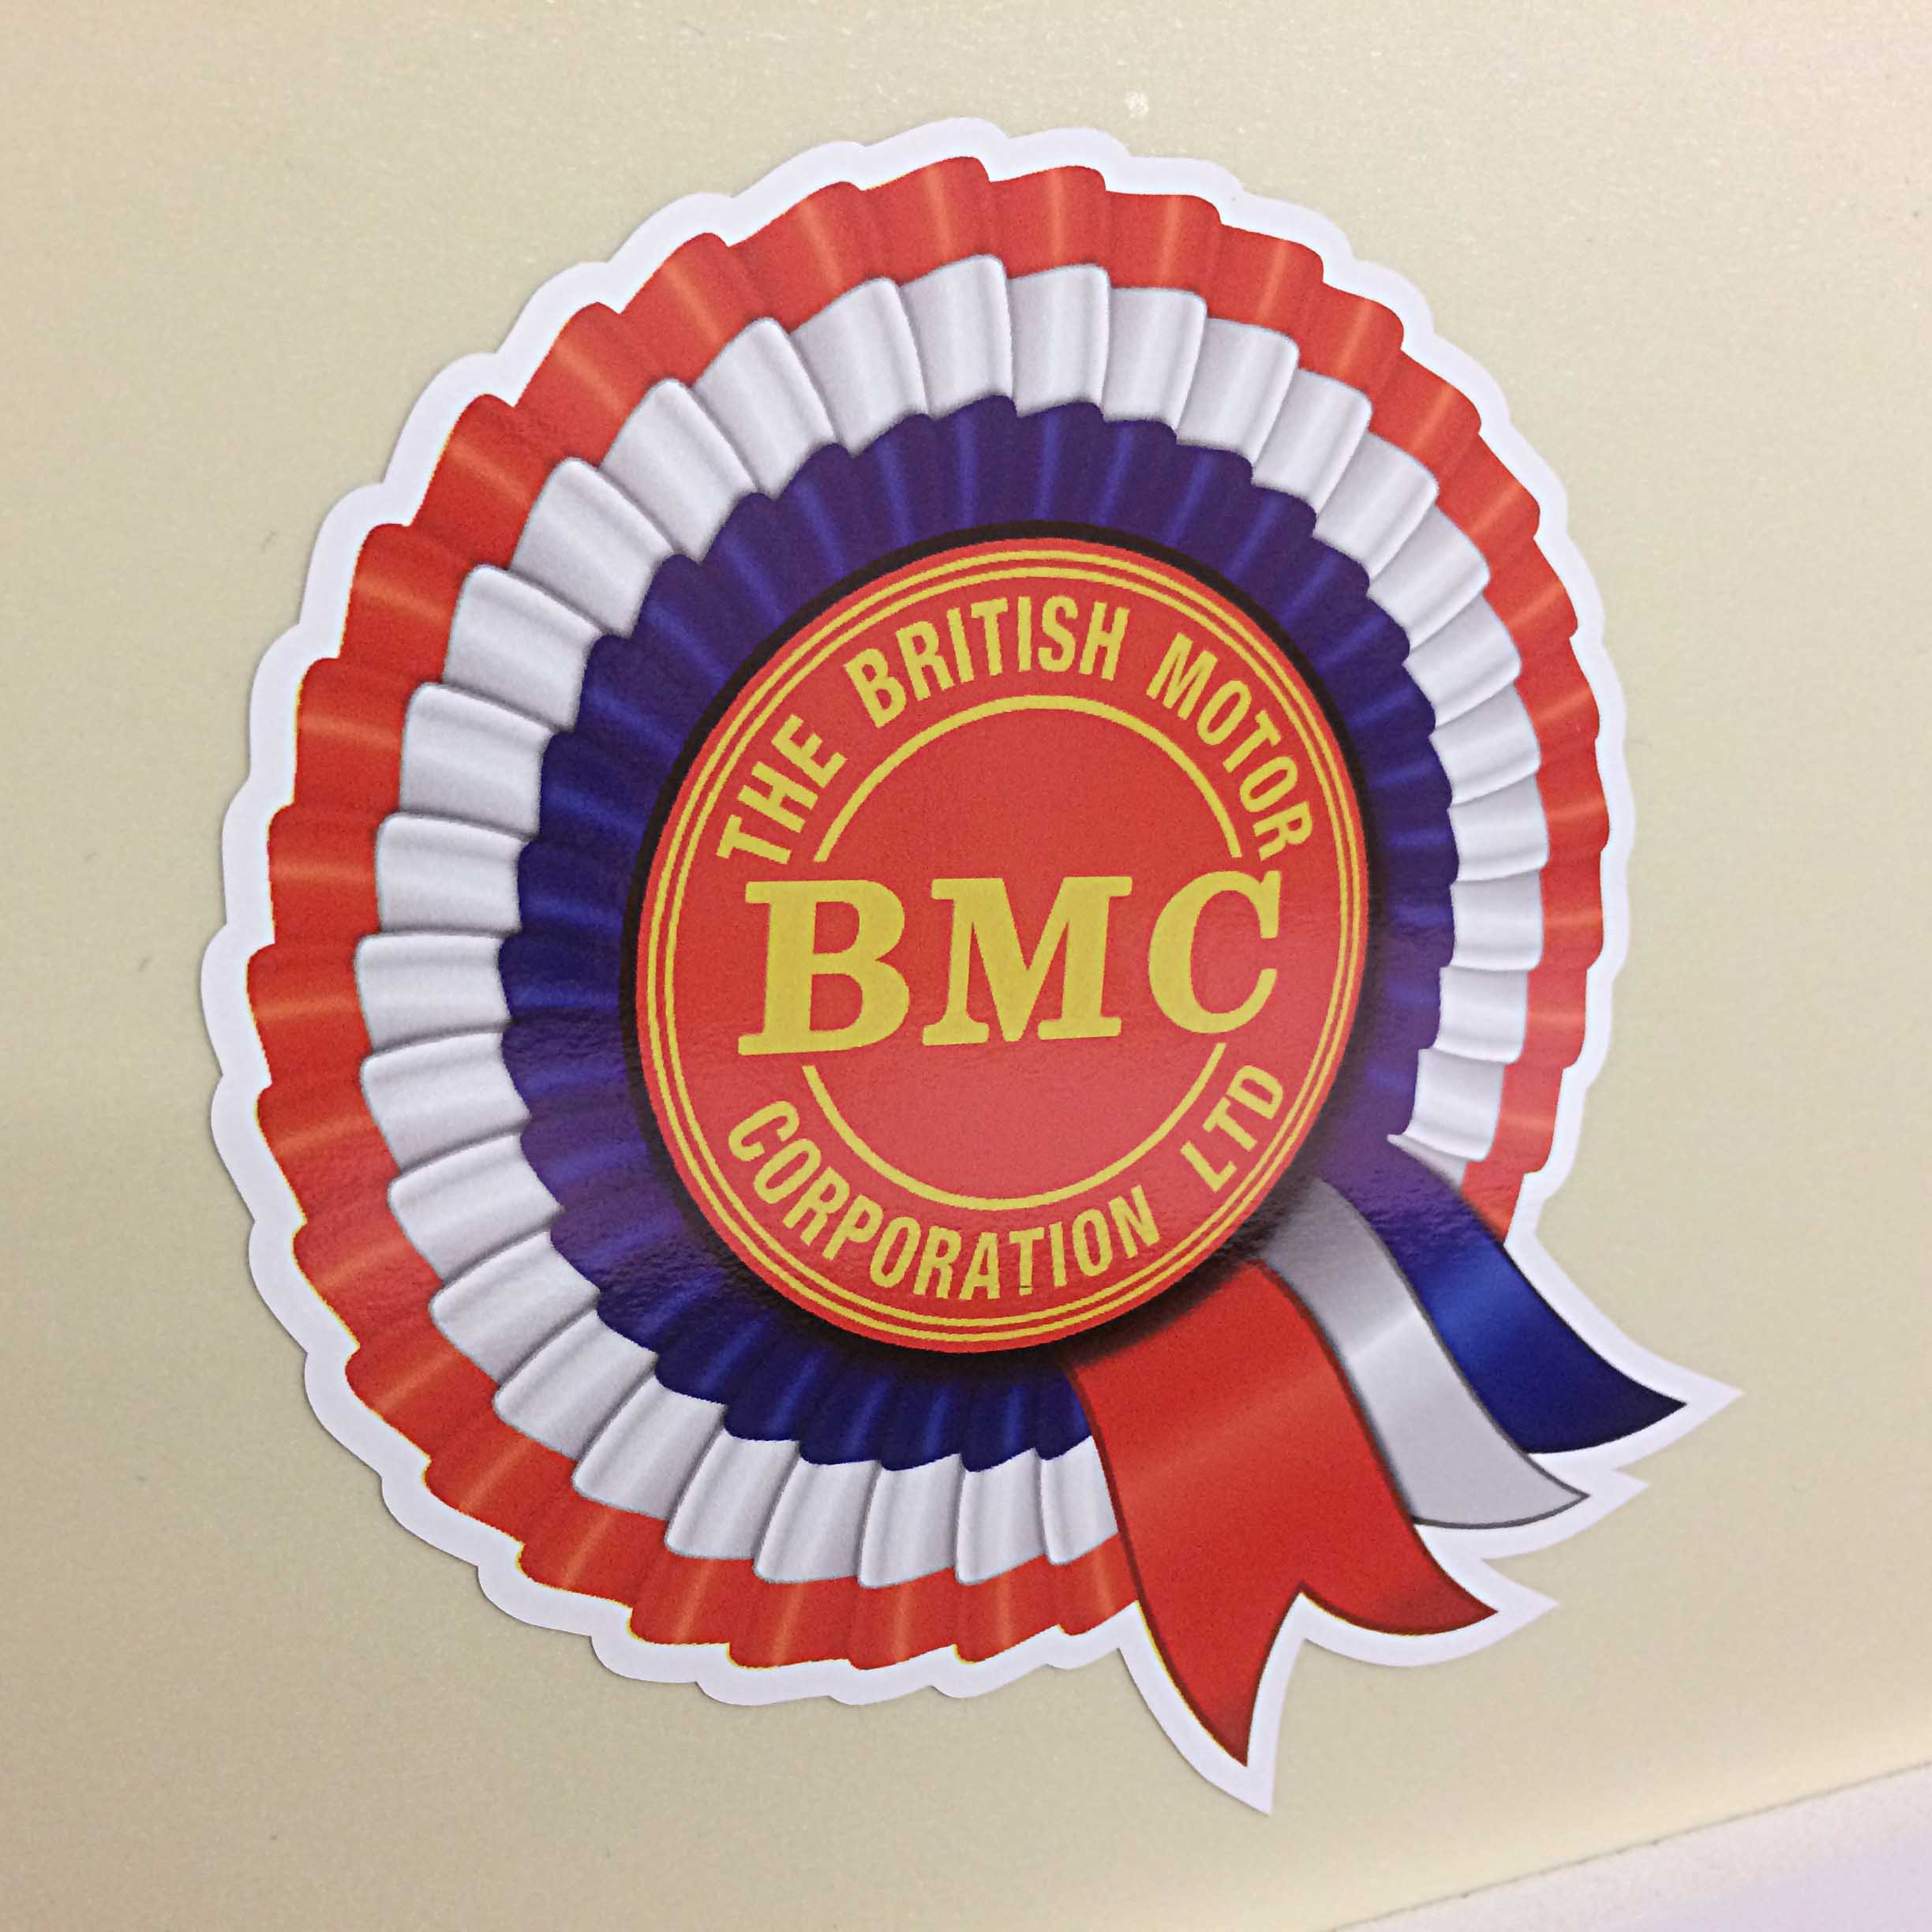 BMC ROSETTE STICKER. BMC The British Motor Corporation Ltd in yellow uppercase lettering surrounds a red disc in the centre of a red, white and blue rosette.